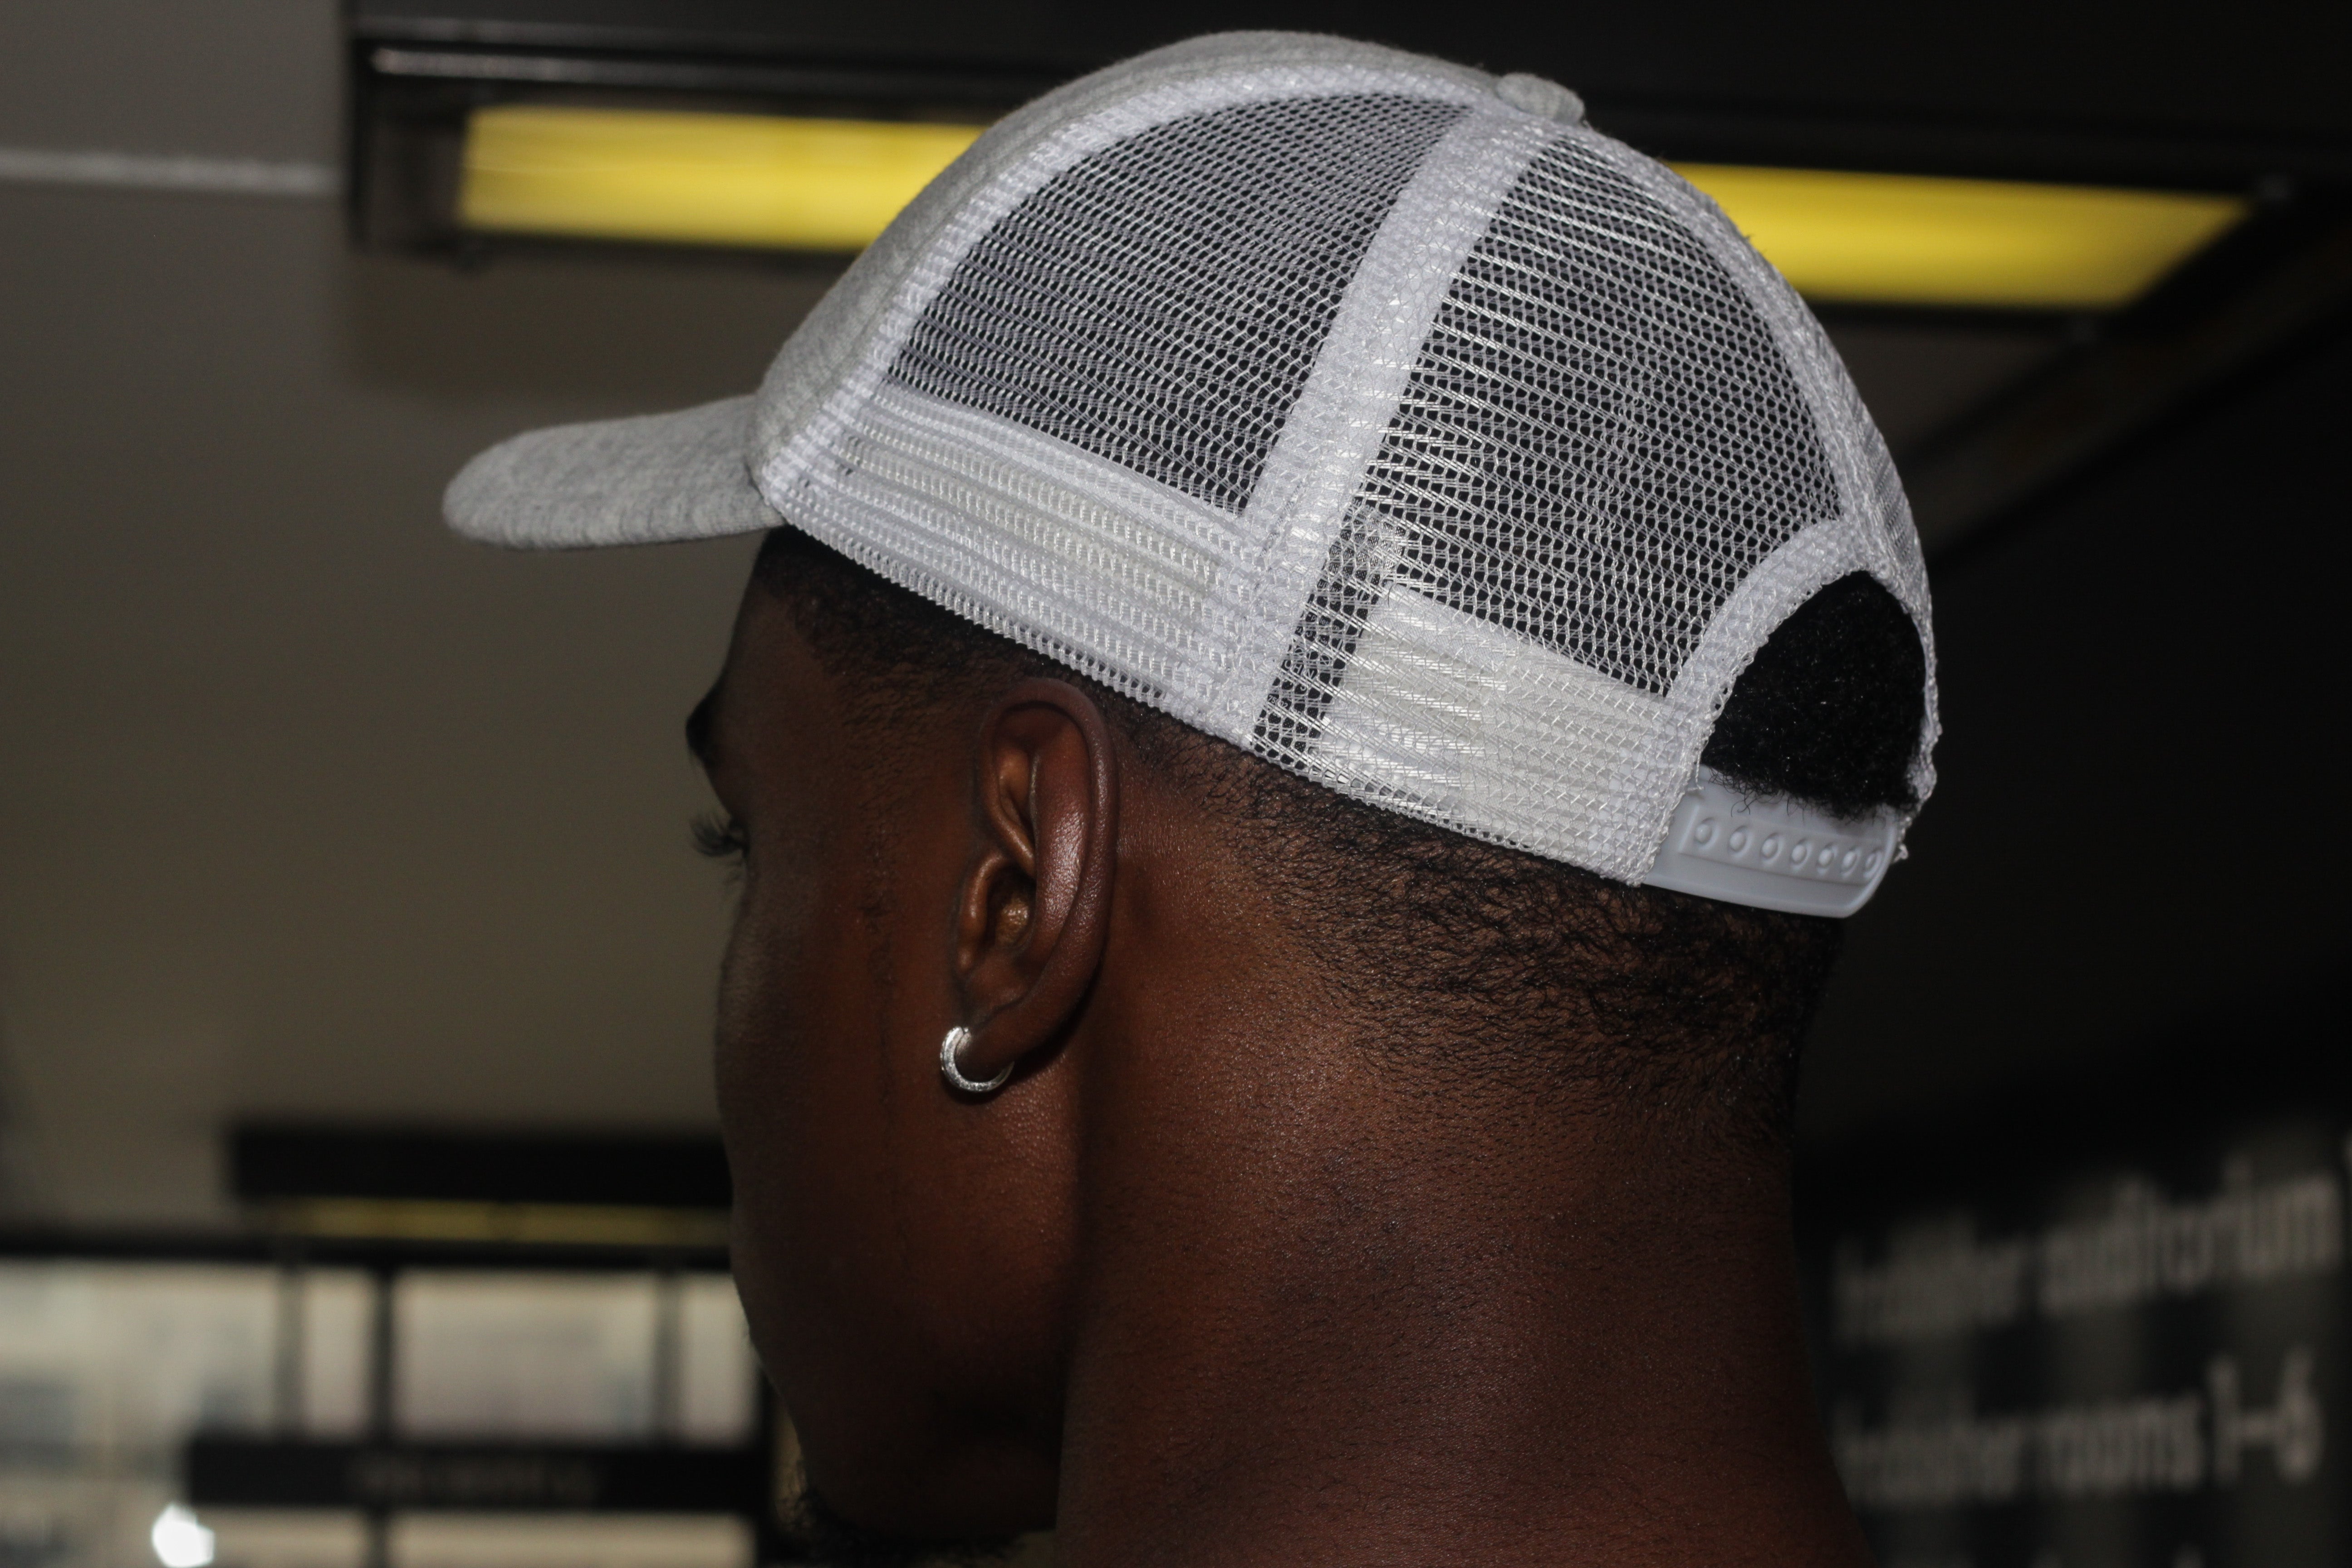 99Piece Grey and White Trucker Cap with adjustable snap.  100% Cotton (front panel and peak) & 100% Nylon mesh rear panels.